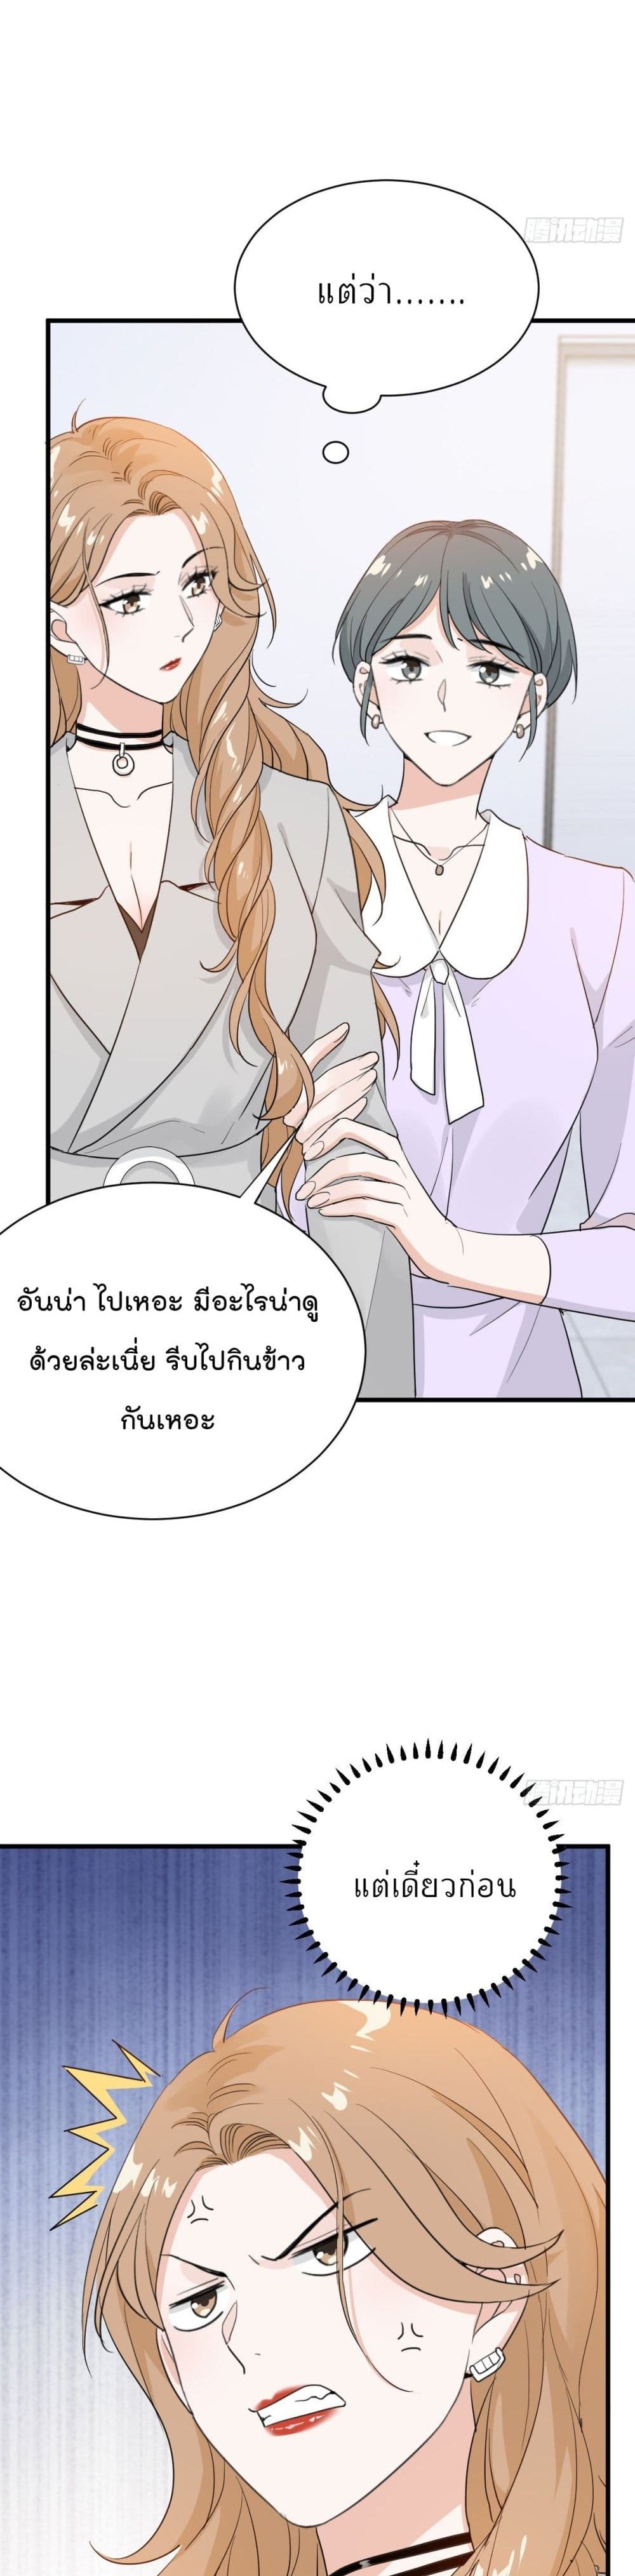 The Faded Memory - หน้า 15